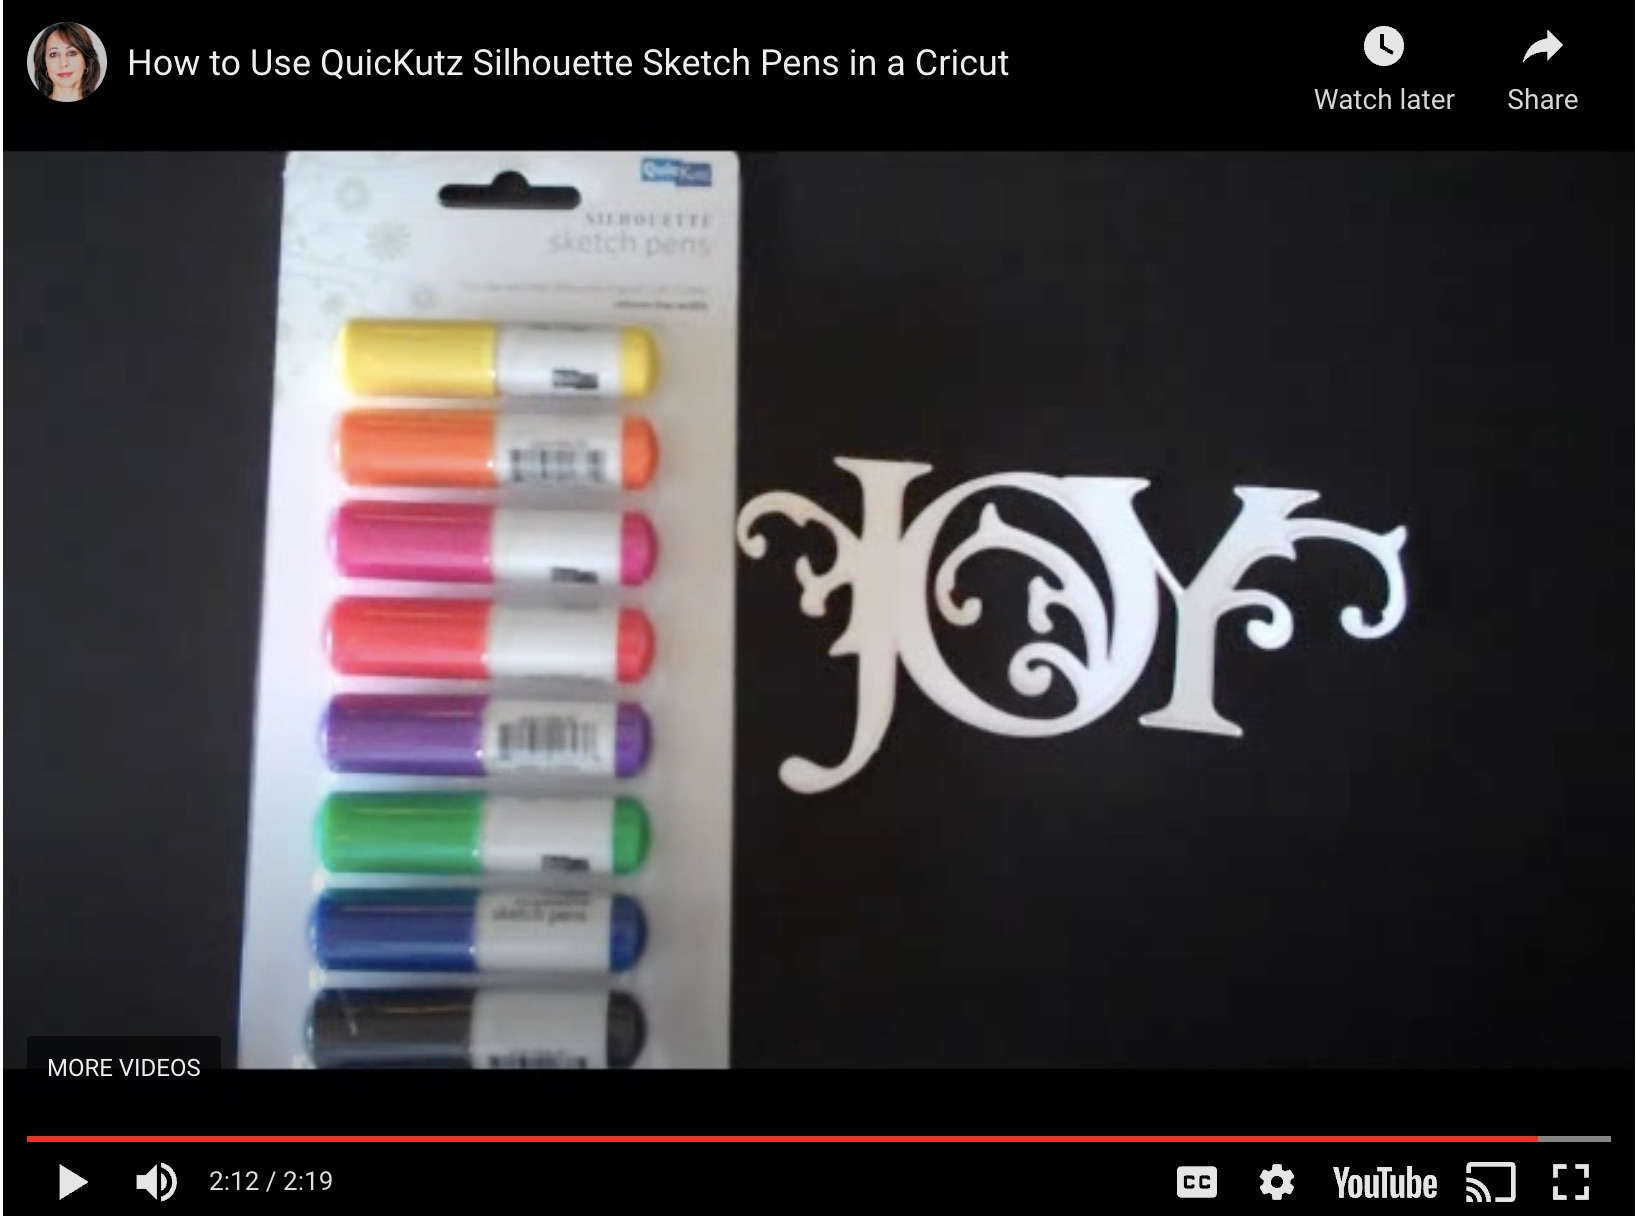 How to Use QuicKutz Silhouette Sketch Pens in a Cricut Video